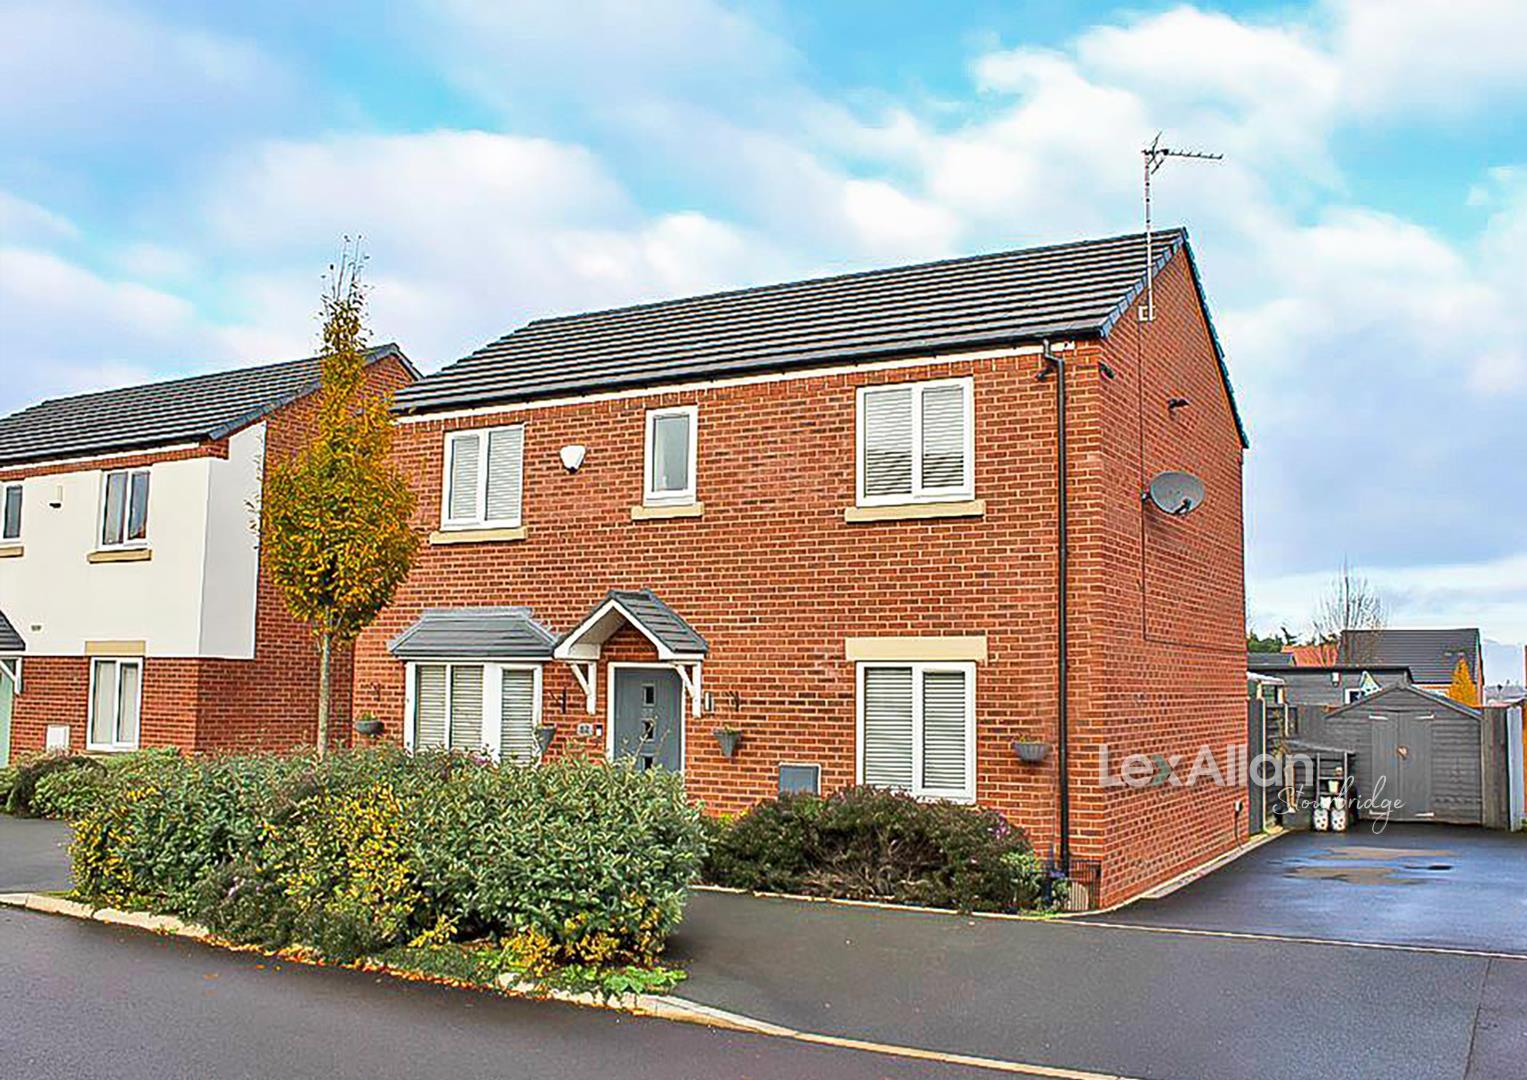 4 bed detached house for sale in Mallows Grove, Dudley - Property Image 1